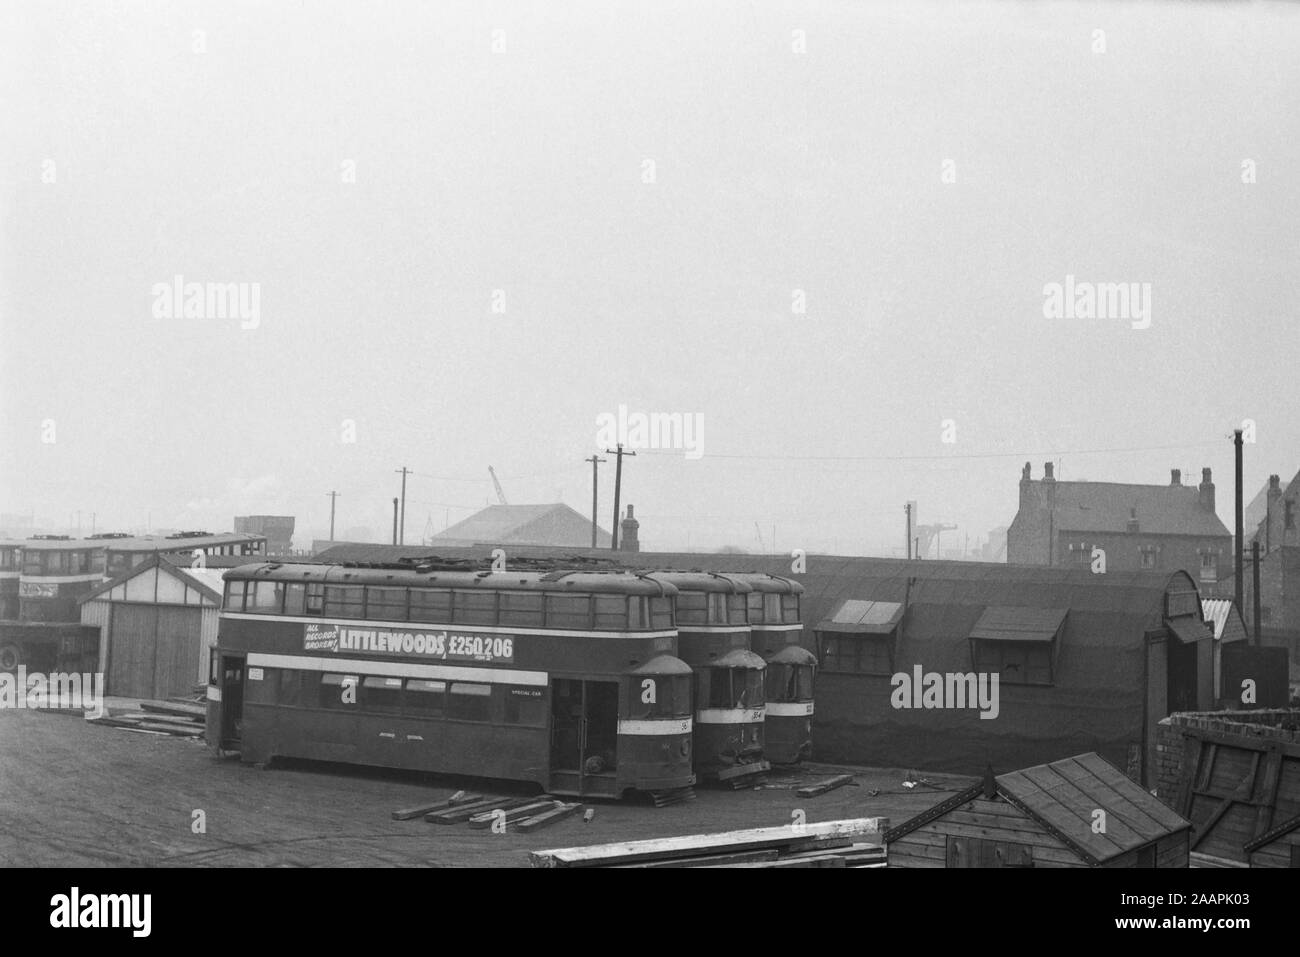 Leeds (Feltham) tram no,s  561, 554 and 522 taken at a scrapyard during or after 1959 when the Leeds trams were decommissioned. Stock Photo